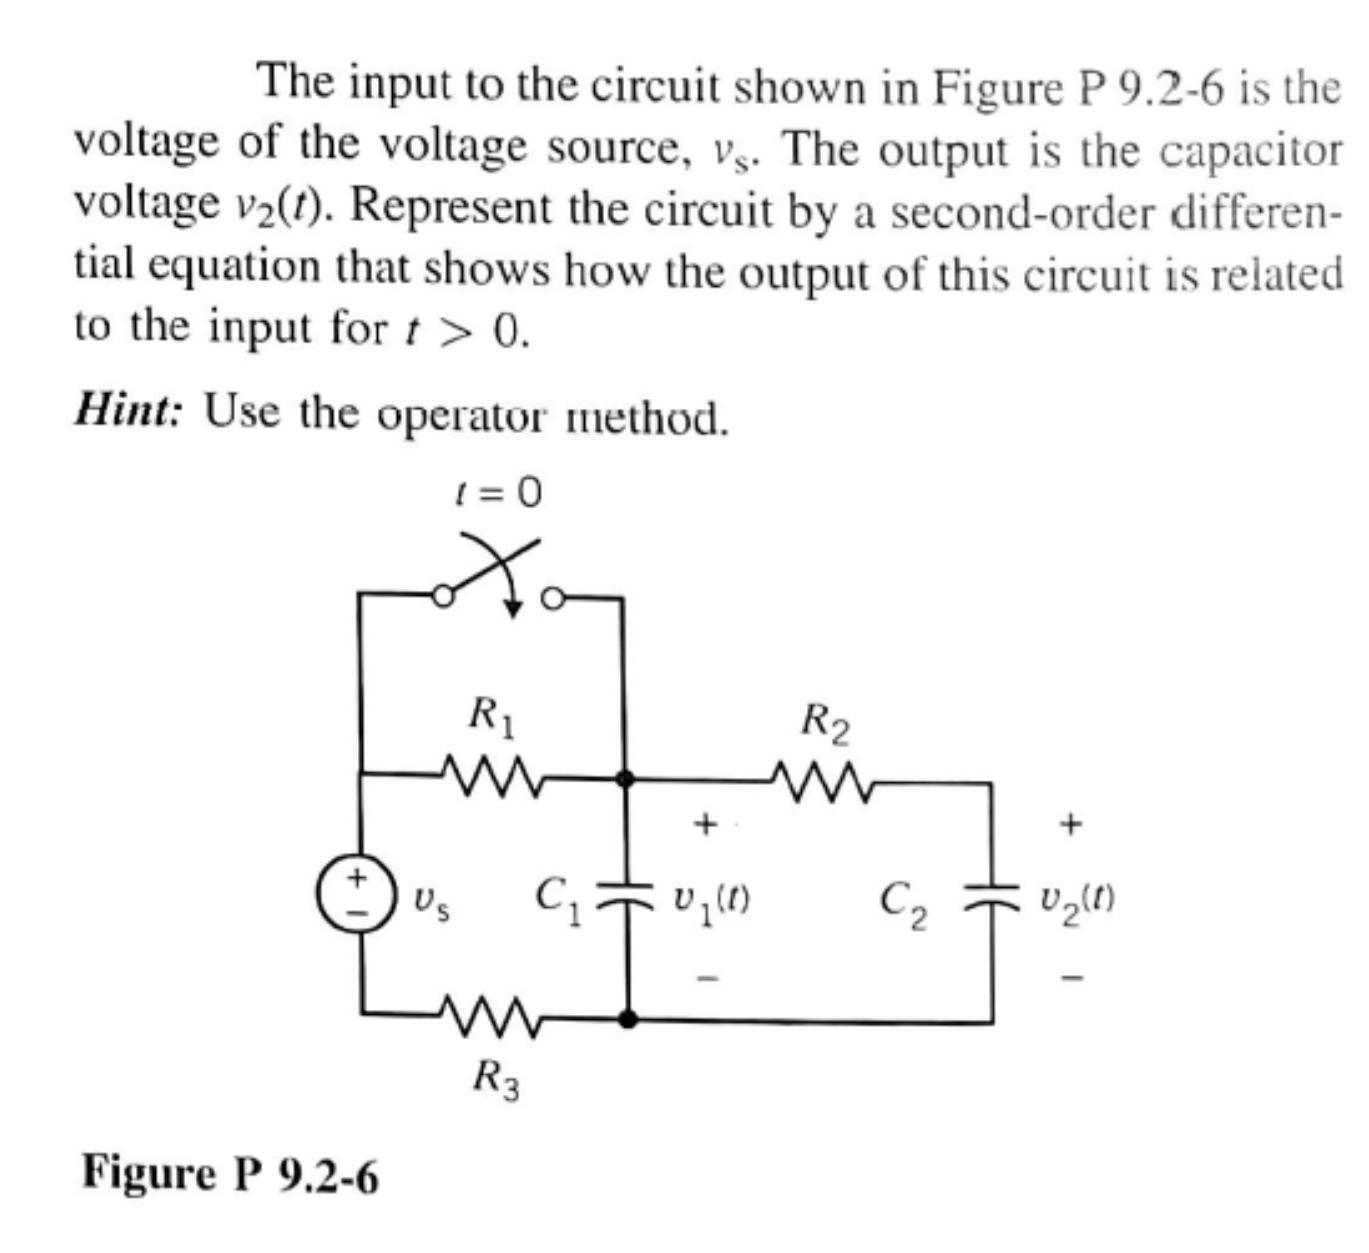 The input to the circuit shown in Figure P 9.2-6 is the voltage of the voltage source, vs. The output is the